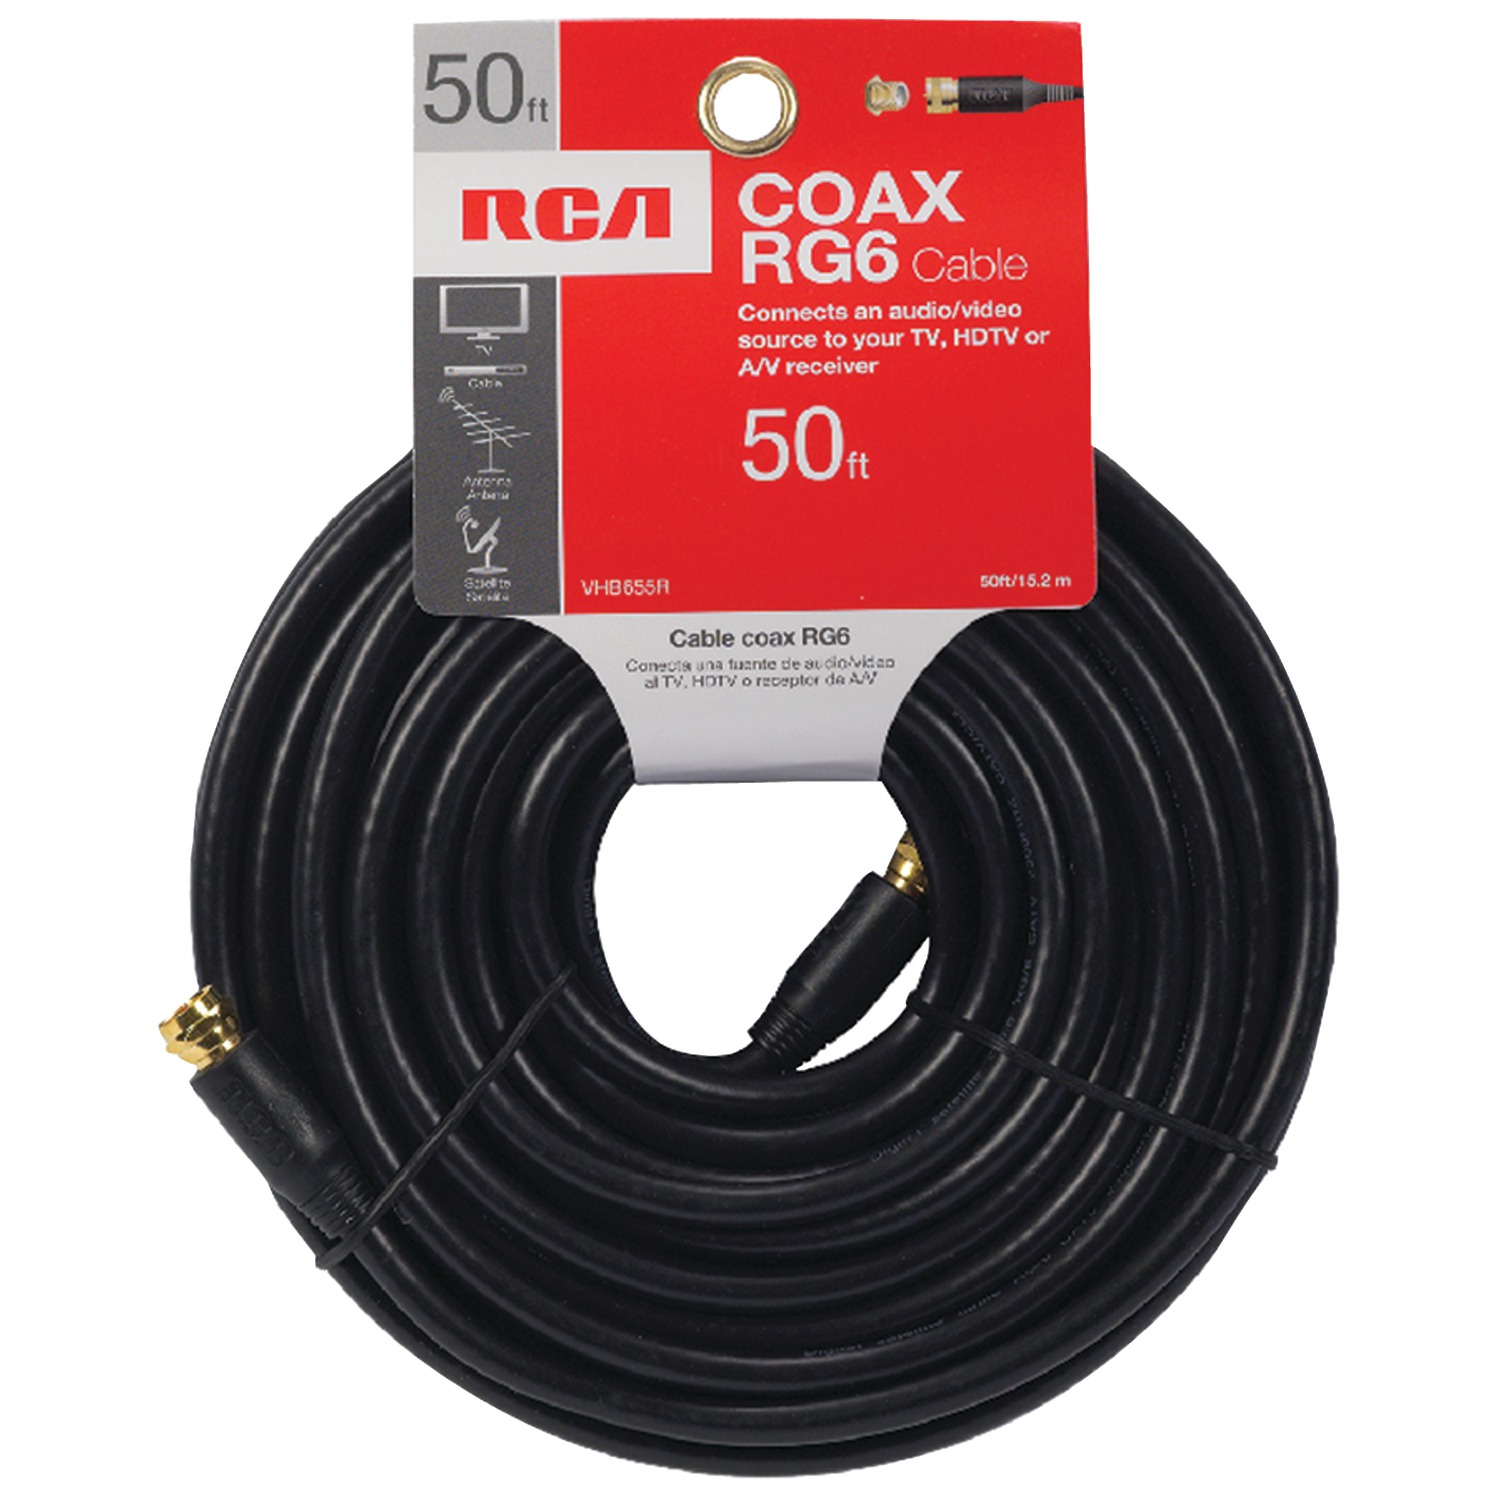 Rca Vhb655r Rg6 Coaxial Cable (50ft; Black) - image 2 of 3